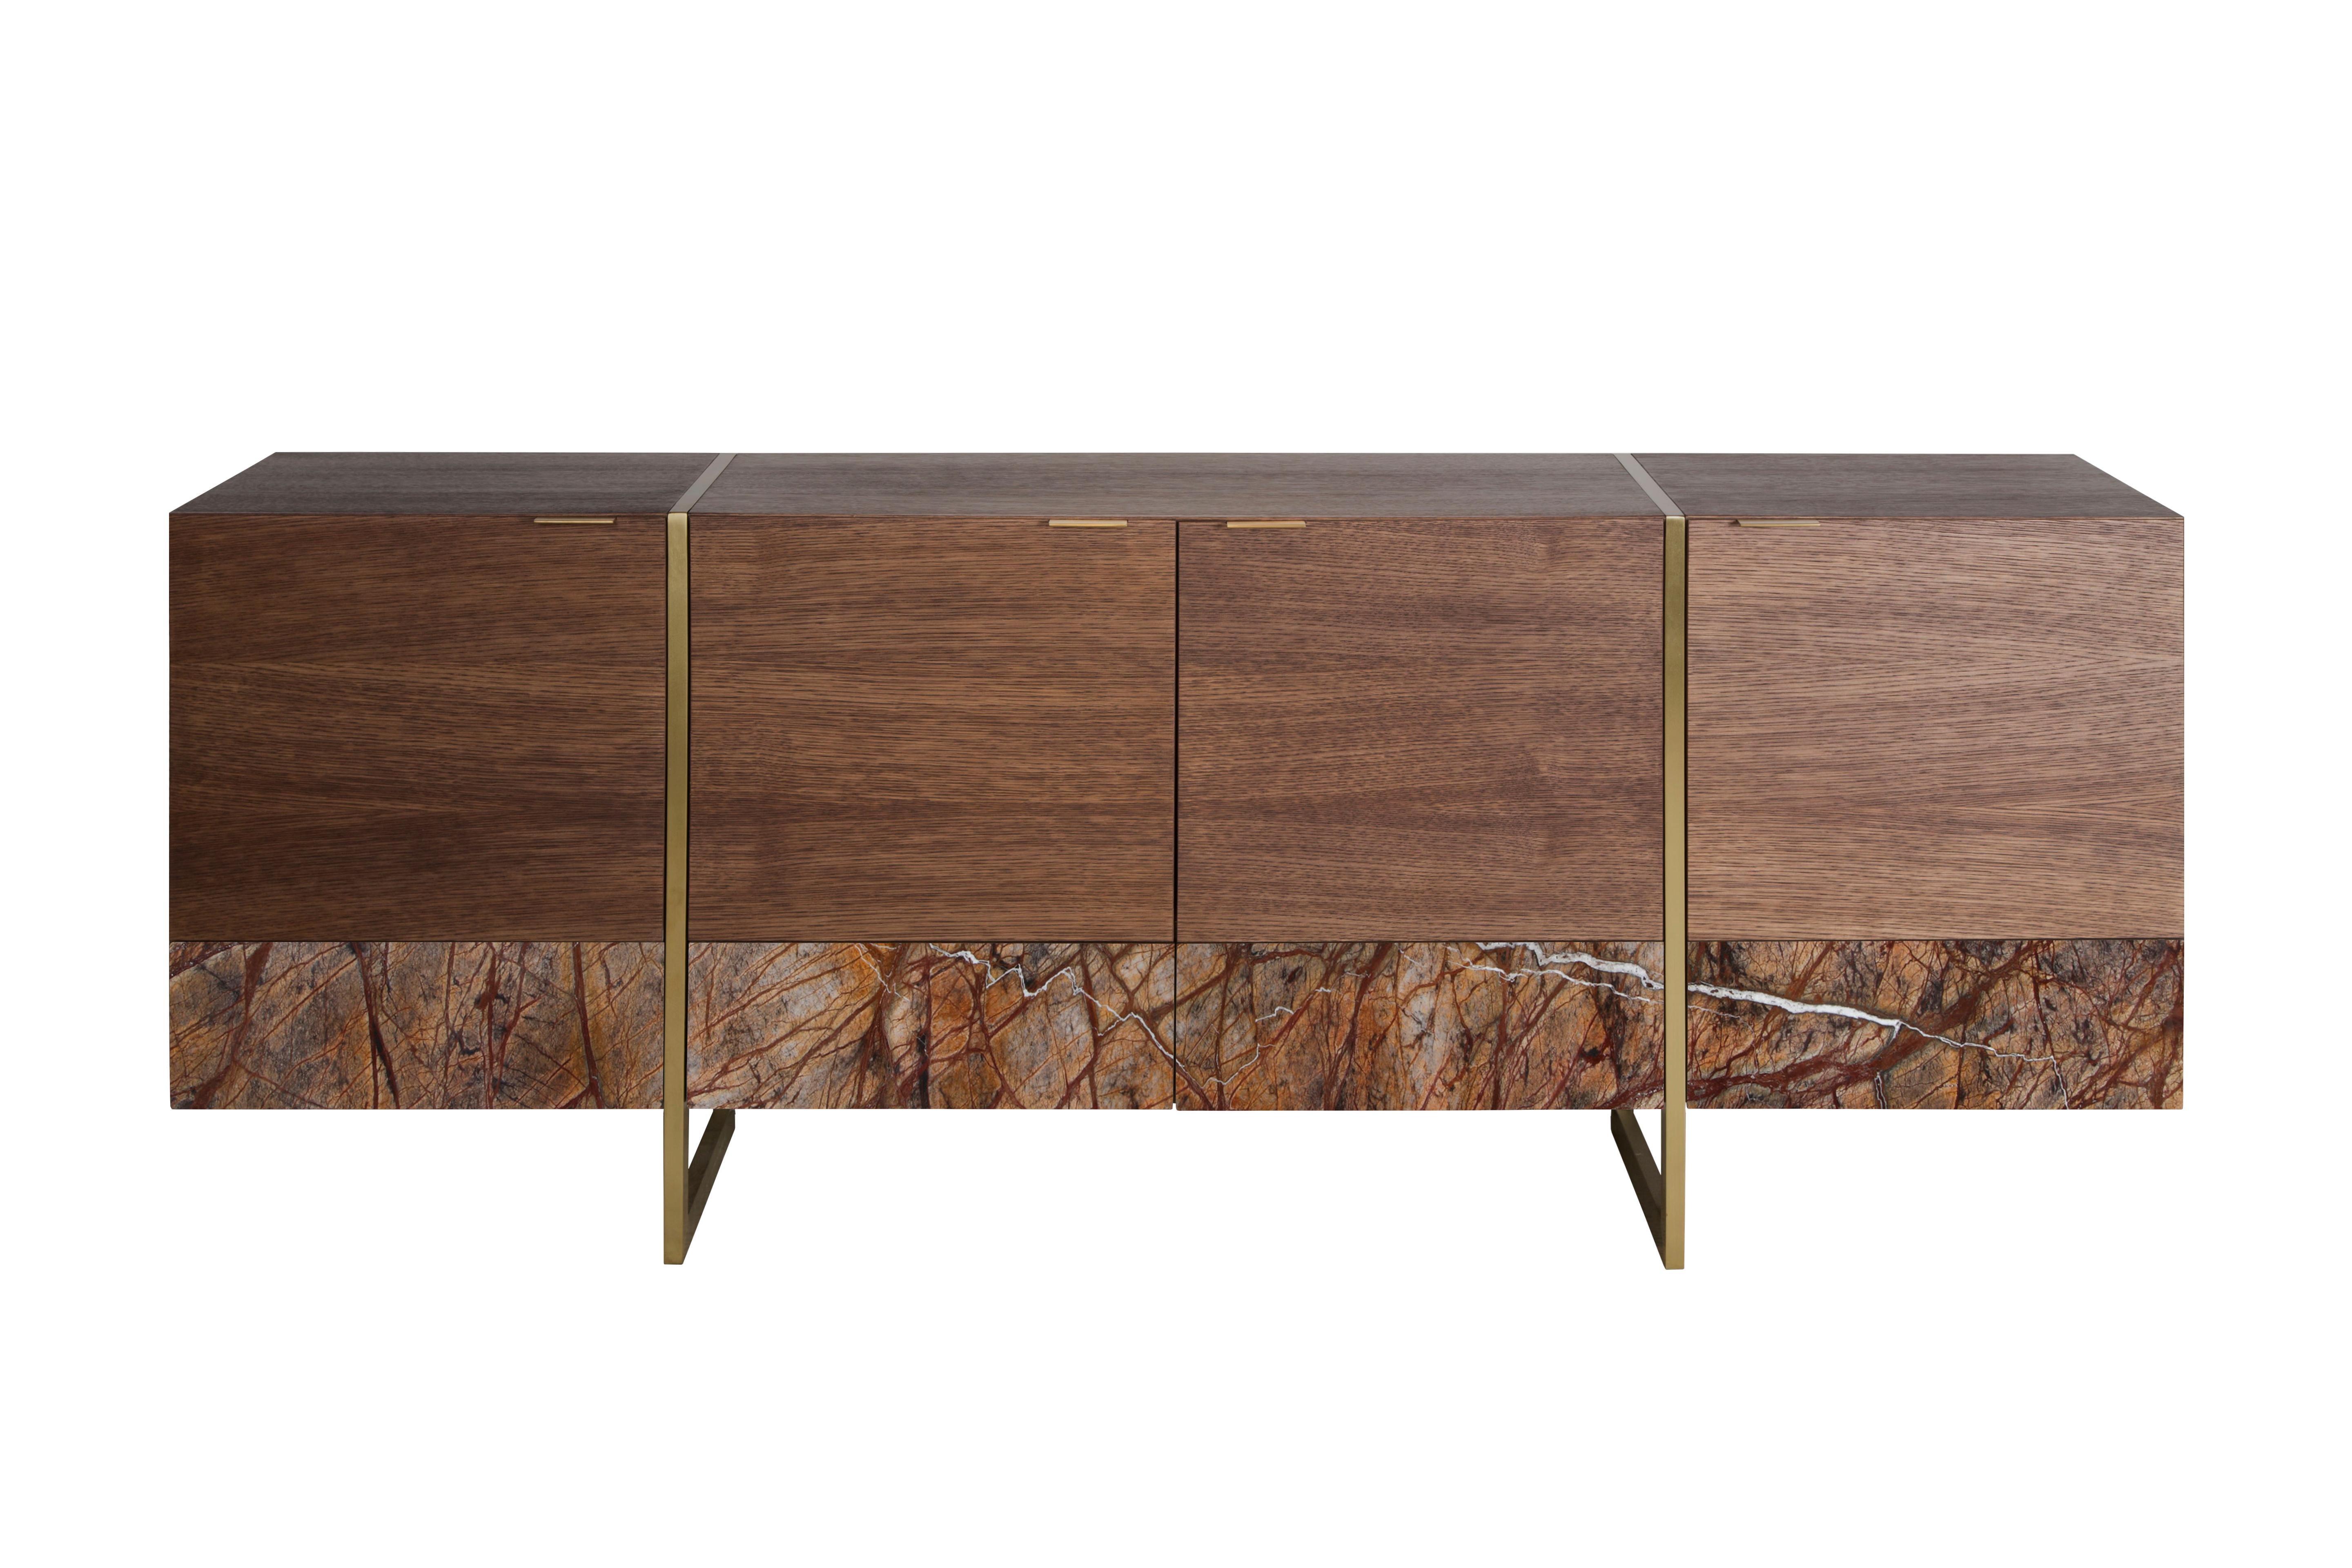 Stripe sideboard for Marbleous by Buket Hos¸can Bazman
2019
Dimensions: W 200, D 45, H 85 cm
Available in different sizes
Material: lacquered oak wood, brass, marble

Buket Hoscan Bazman was born in Izmir, Turkey, in 1989. Graduated at the